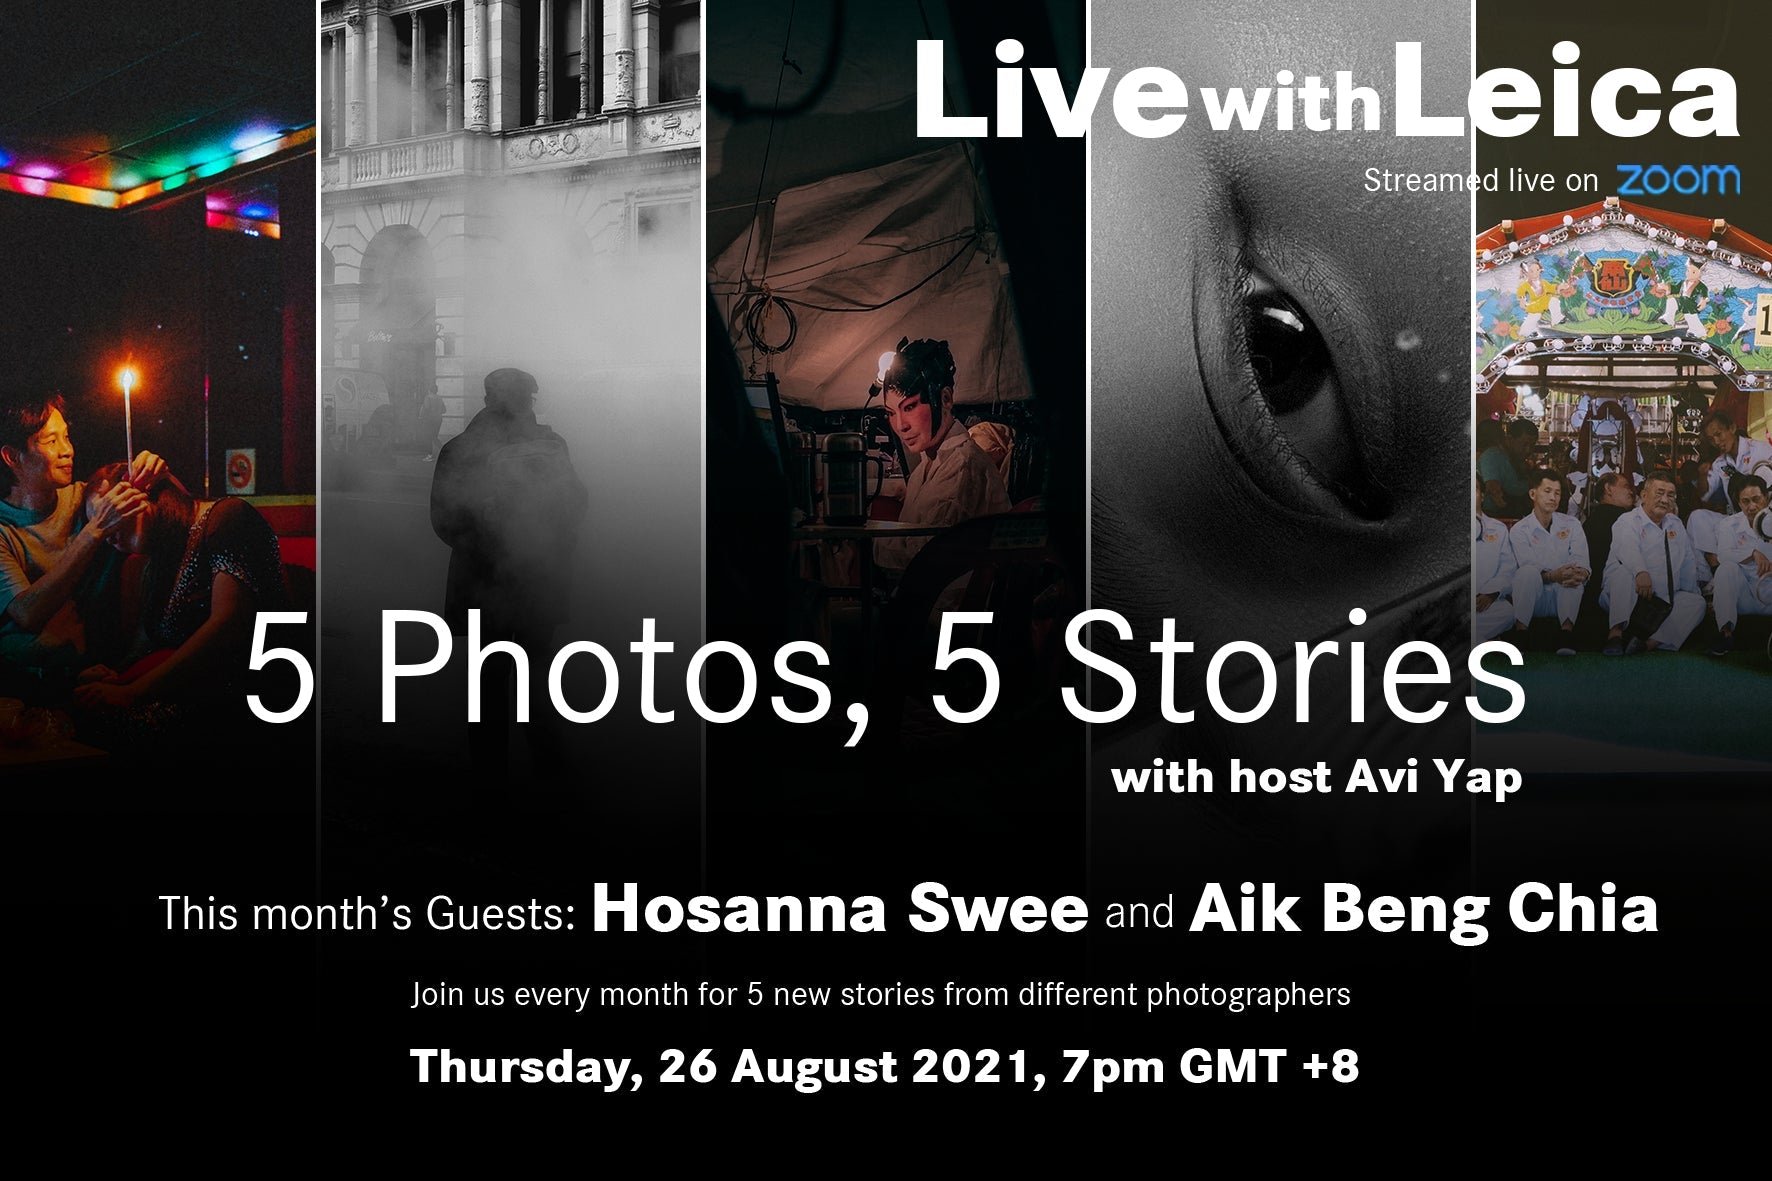 Live with Leica: 5 photos, 5 stories with Hosanna Swee and Aik Beng Chia